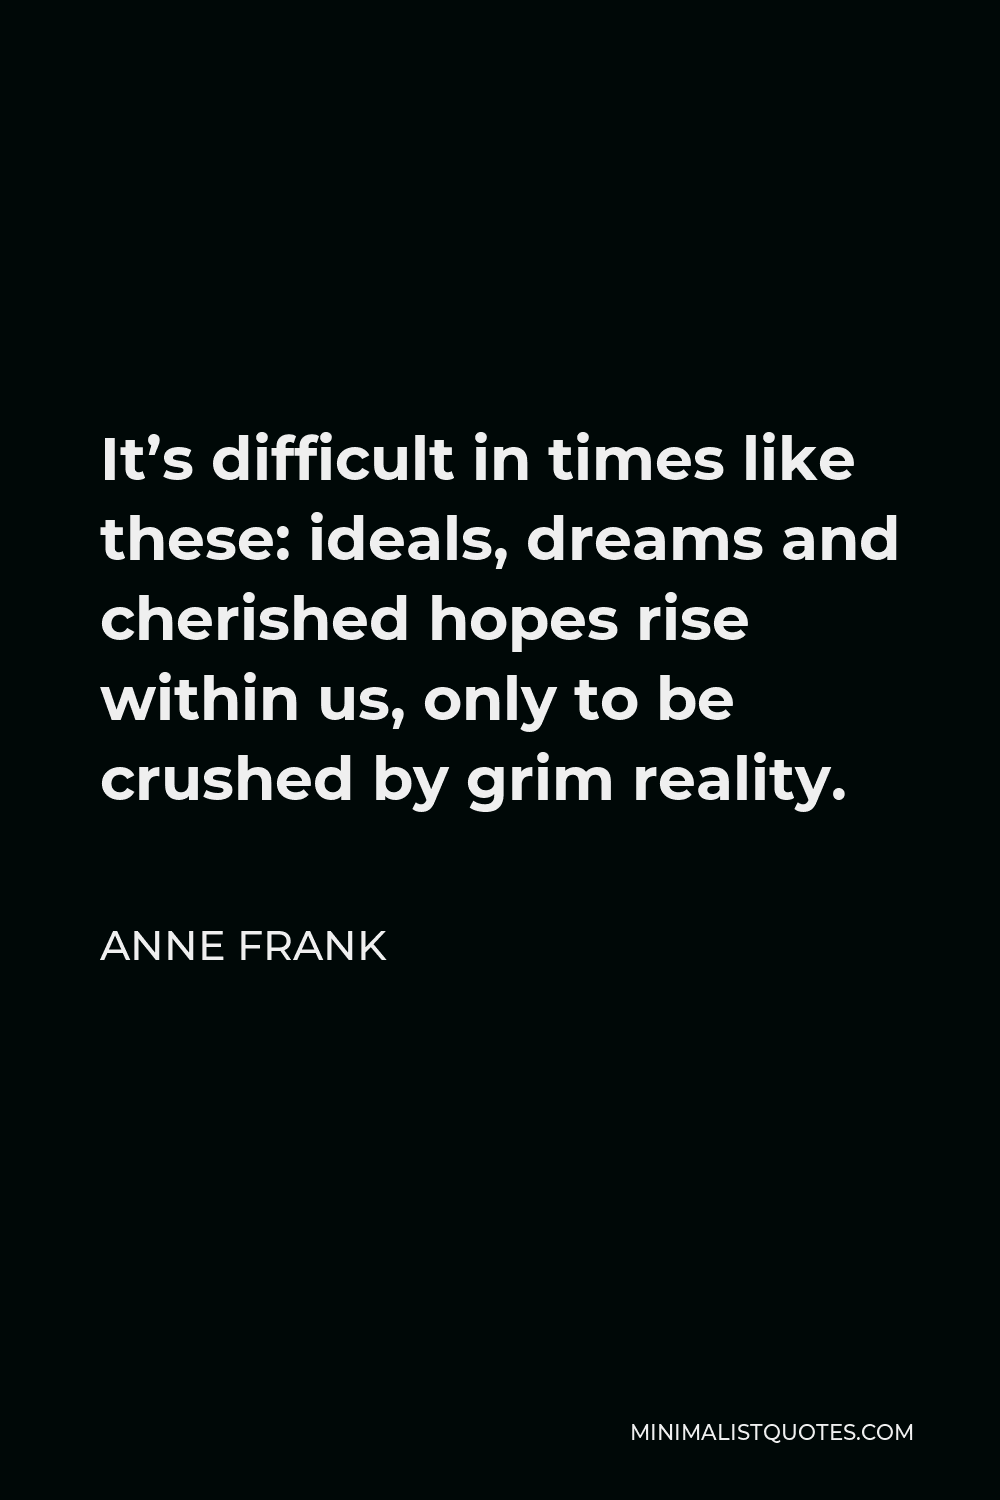 Anne Frank Quote - It’s difficult in times like these: ideals, dreams and cherished hopes rise within us, only to be crushed by grim reality.